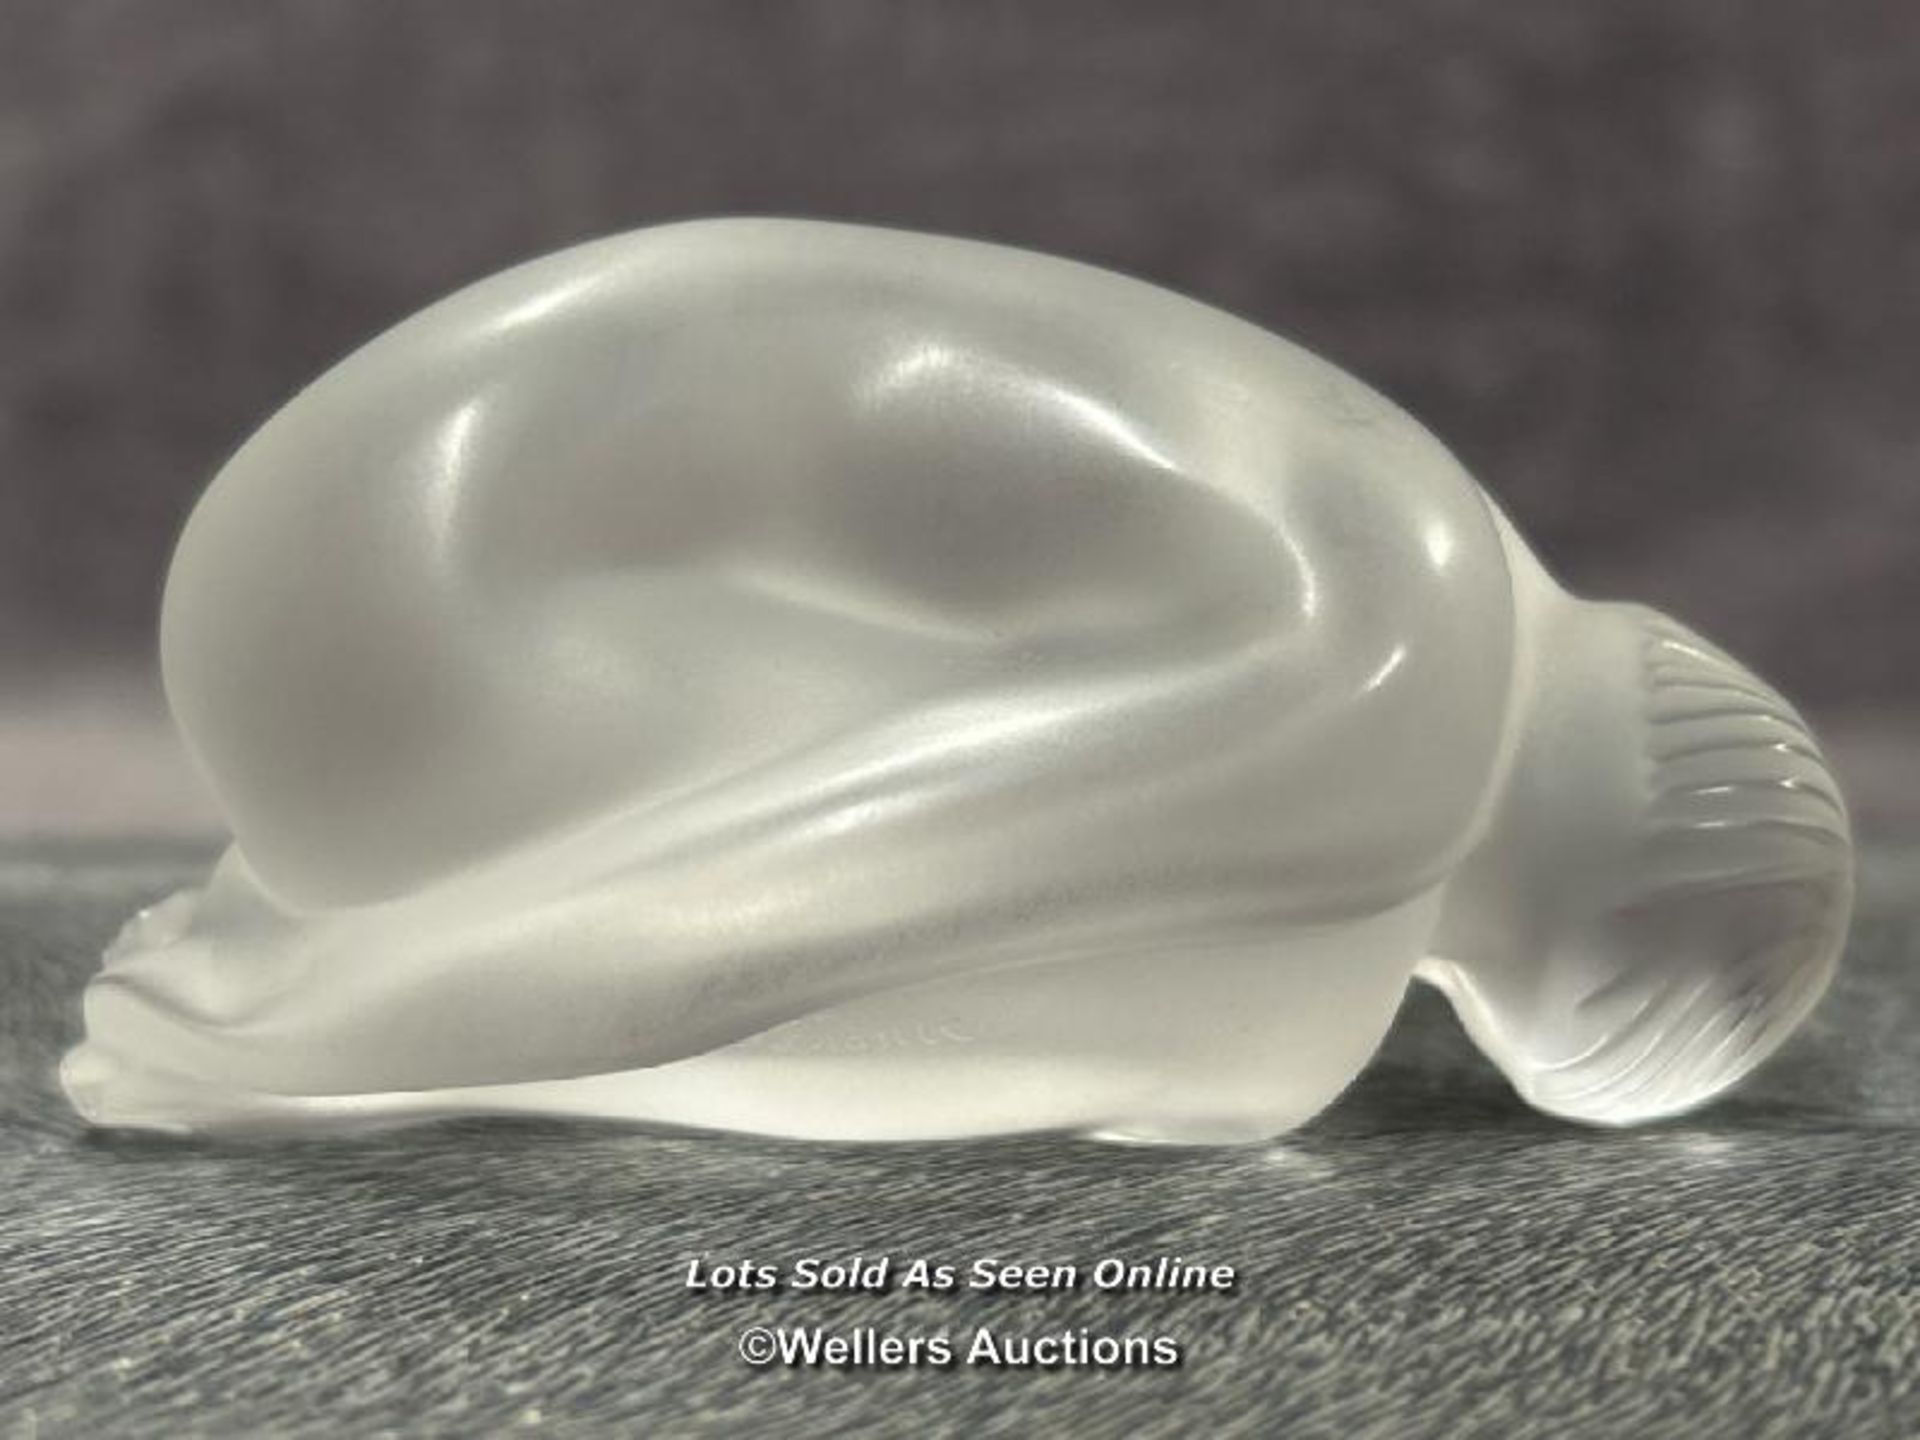 Lalique frosted crystal figurine 'Feuille Pliee', 4cm high, signed / AN2 - Image 2 of 4